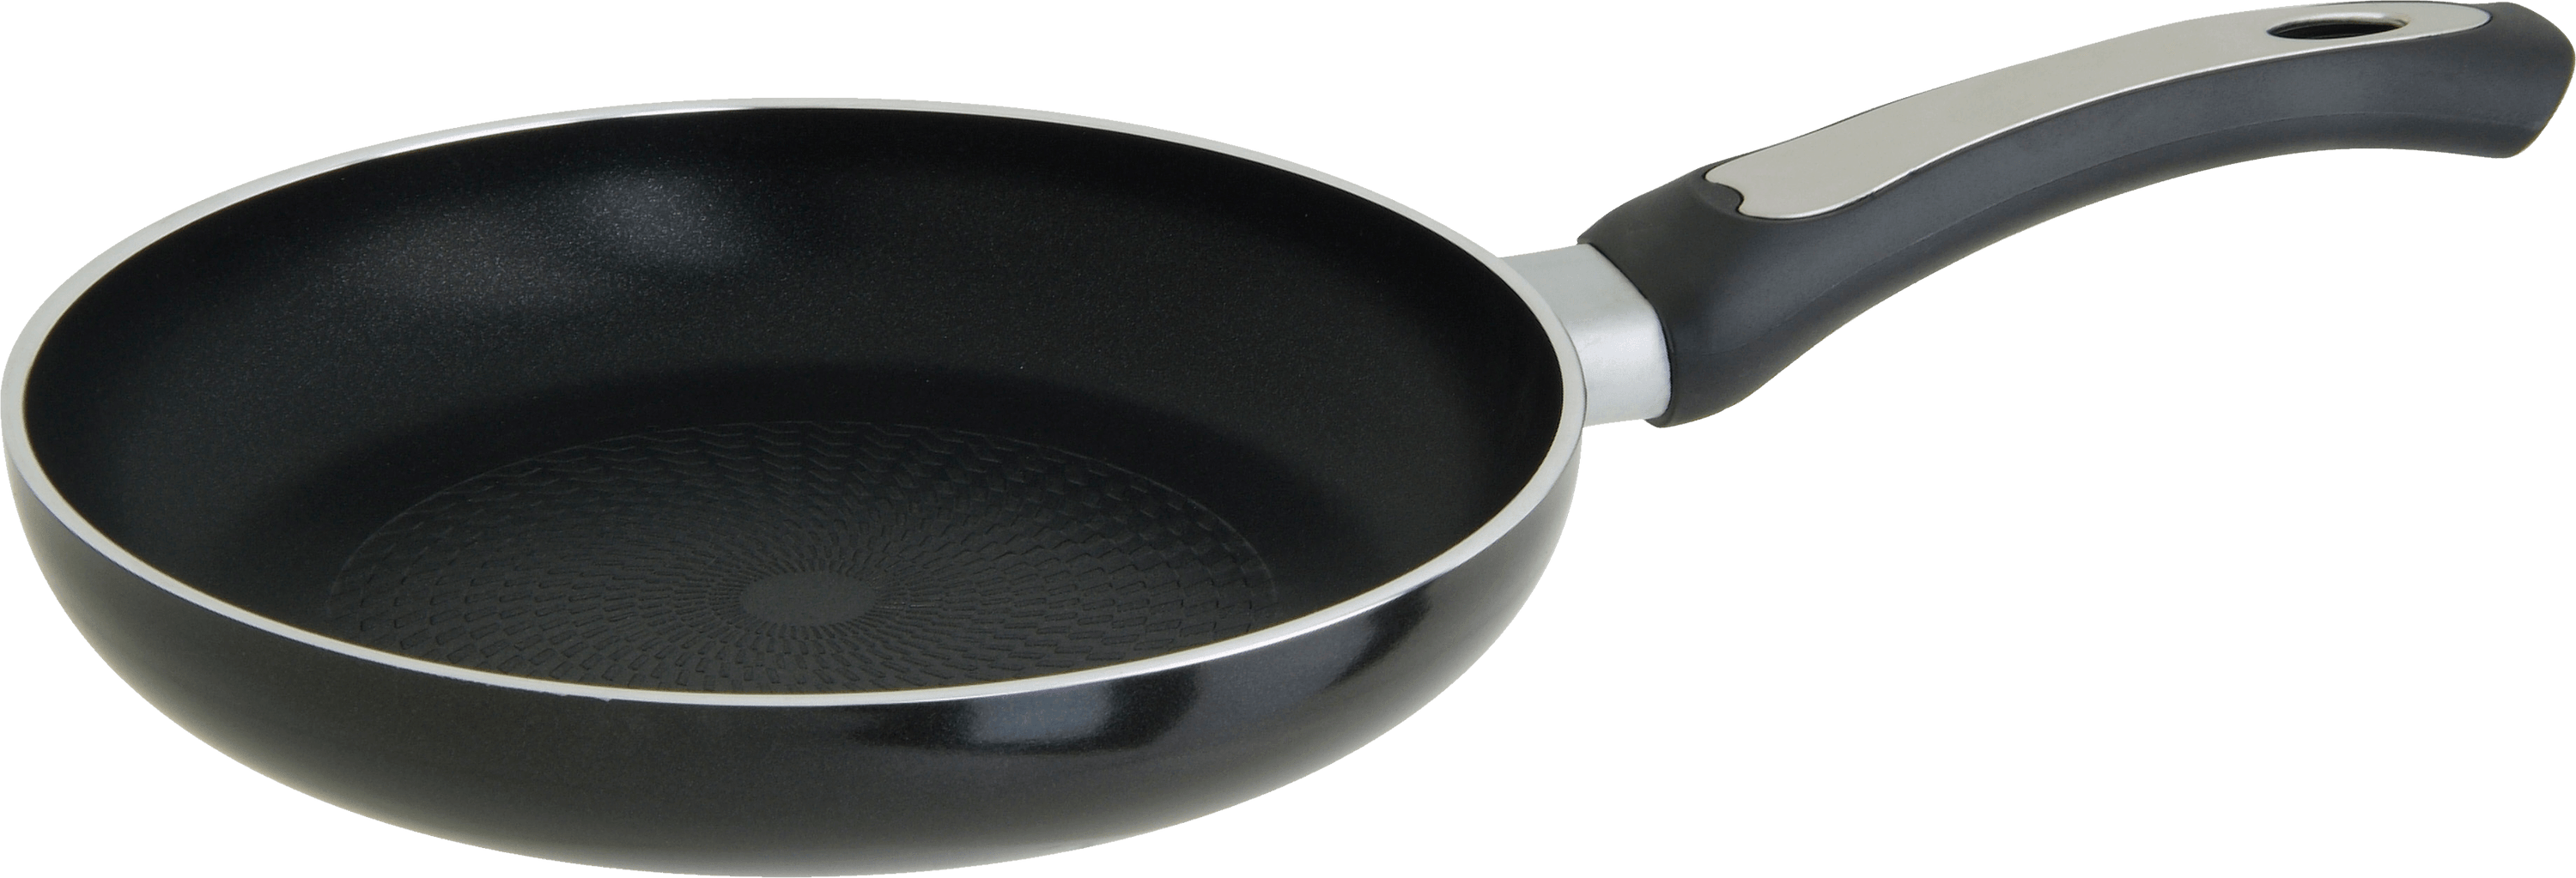 Download PNG image - Stainless Steel Frying Pan PNG File 